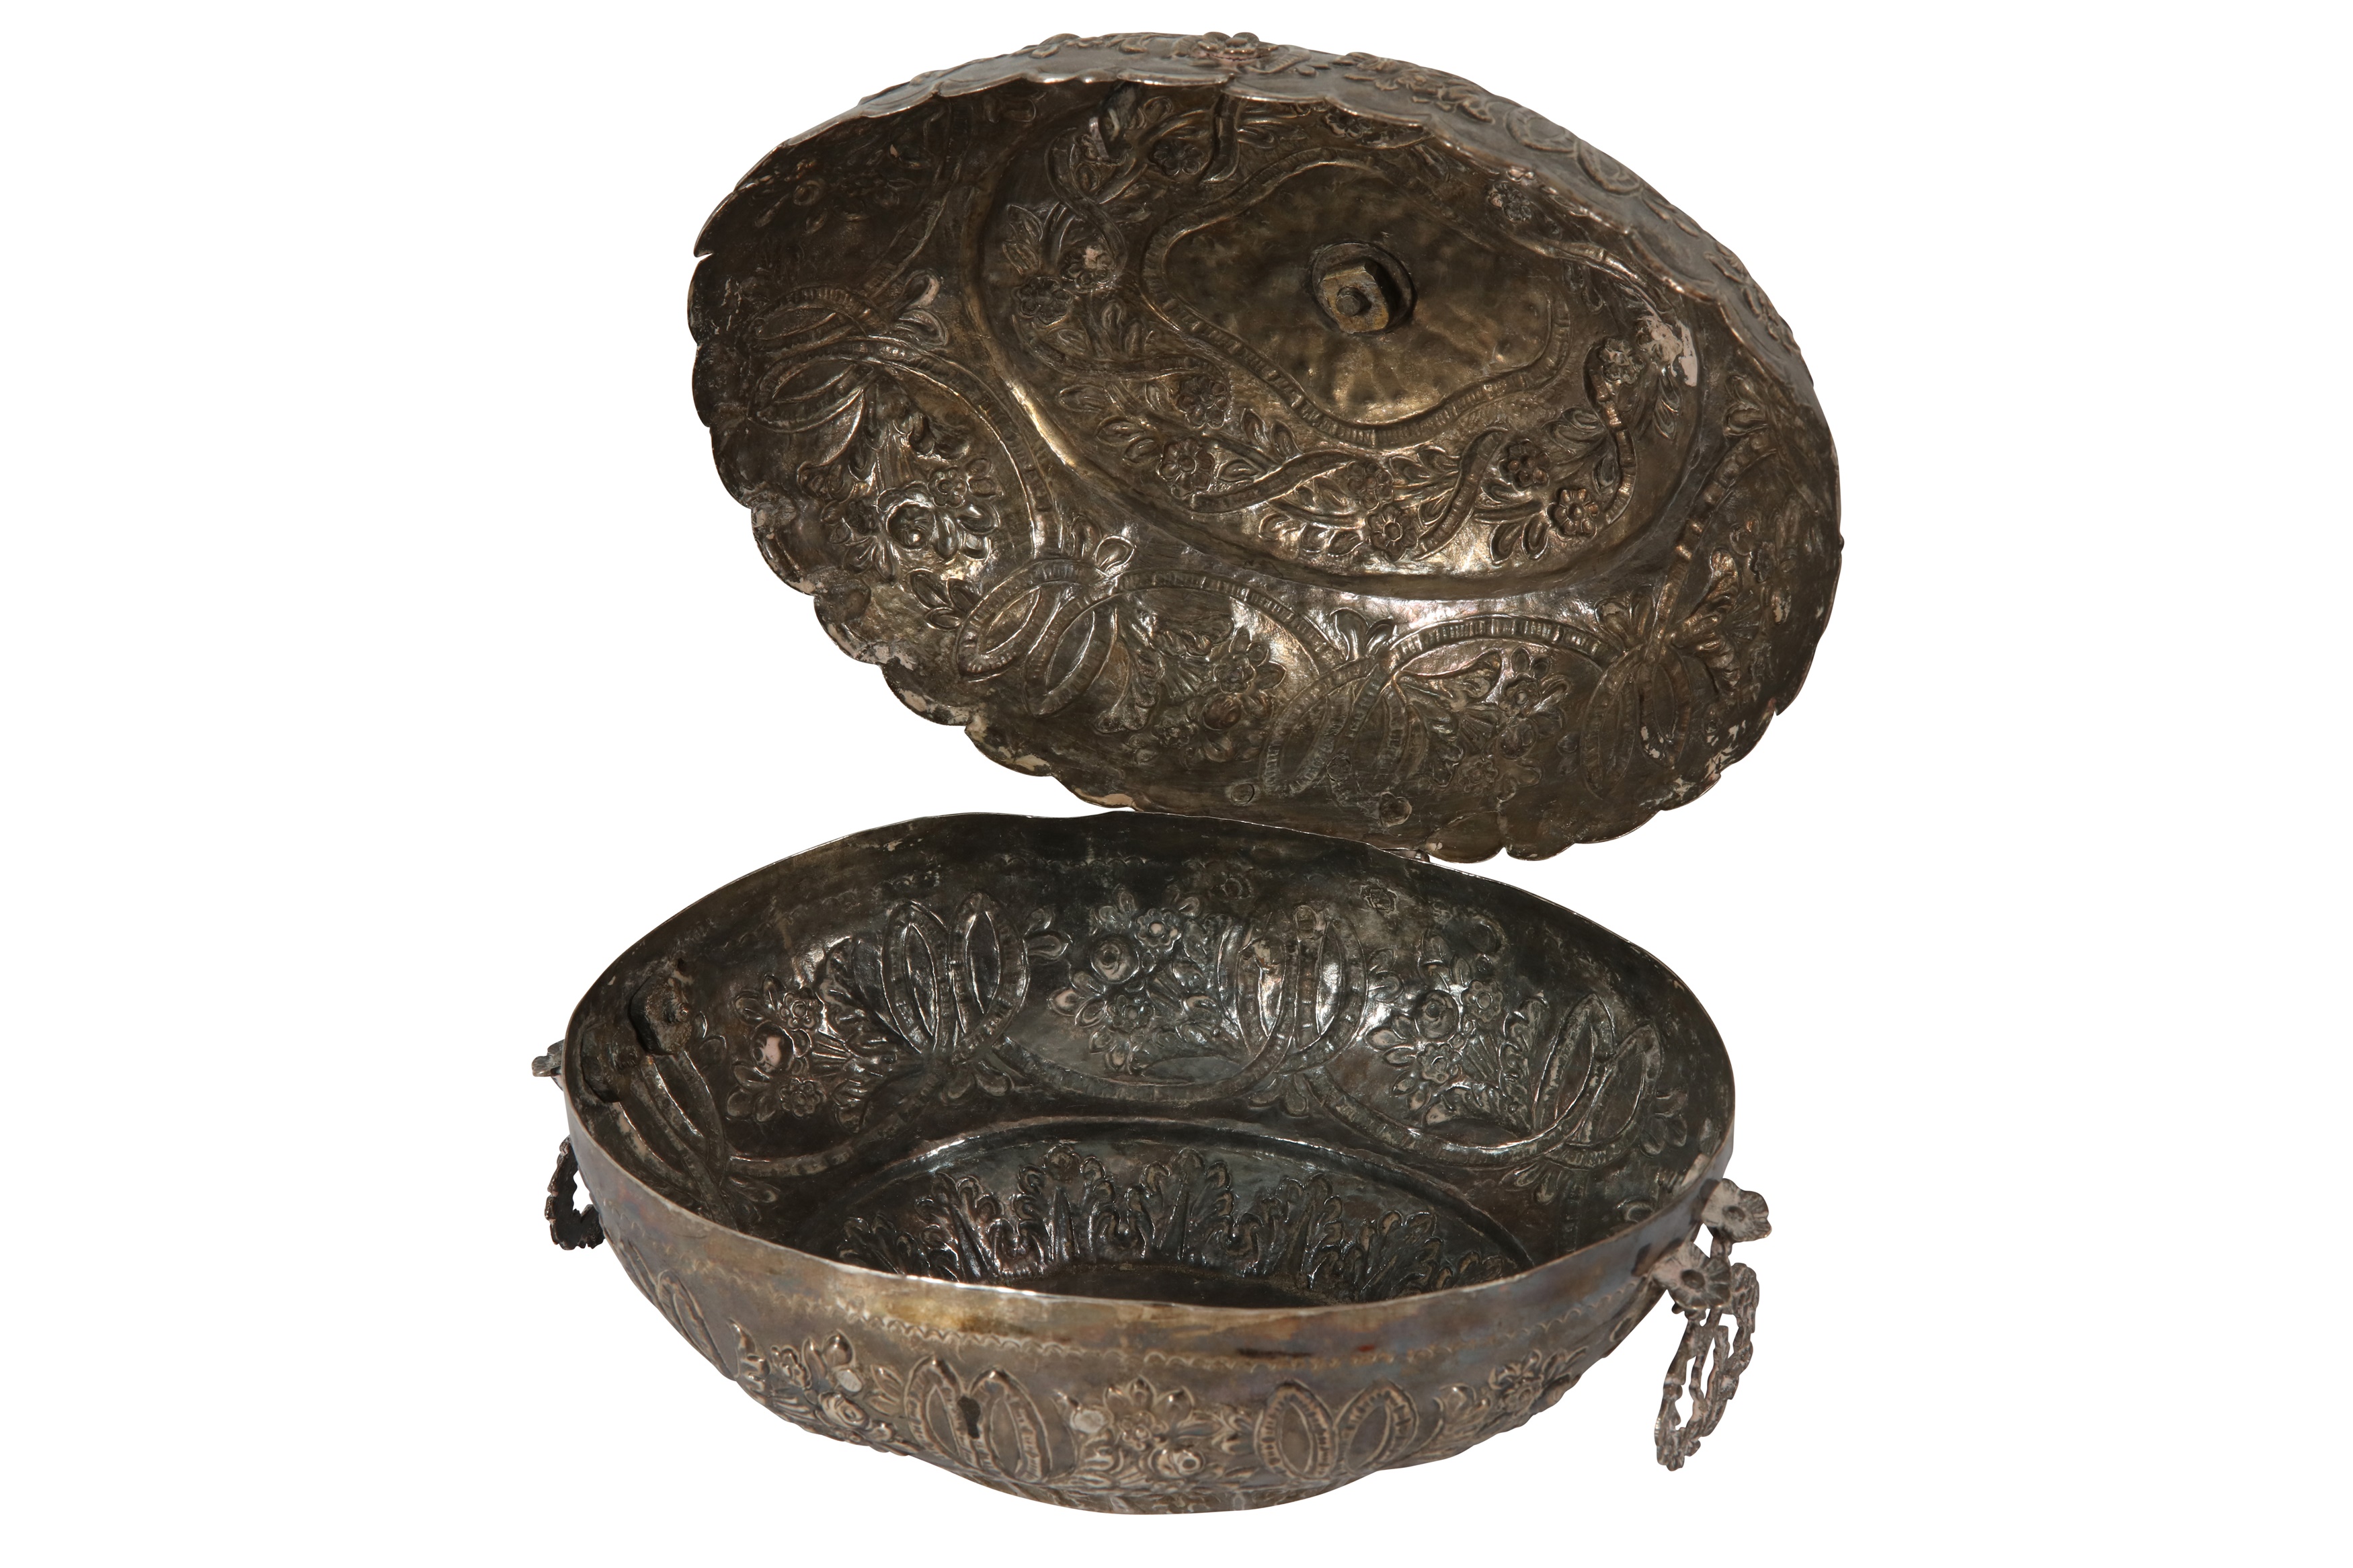 AN OTTOMAN SILVER OVAL CASKET OR SPICE BOX, LATE 19TH/EARLY 20TH CENTURY - Image 2 of 3